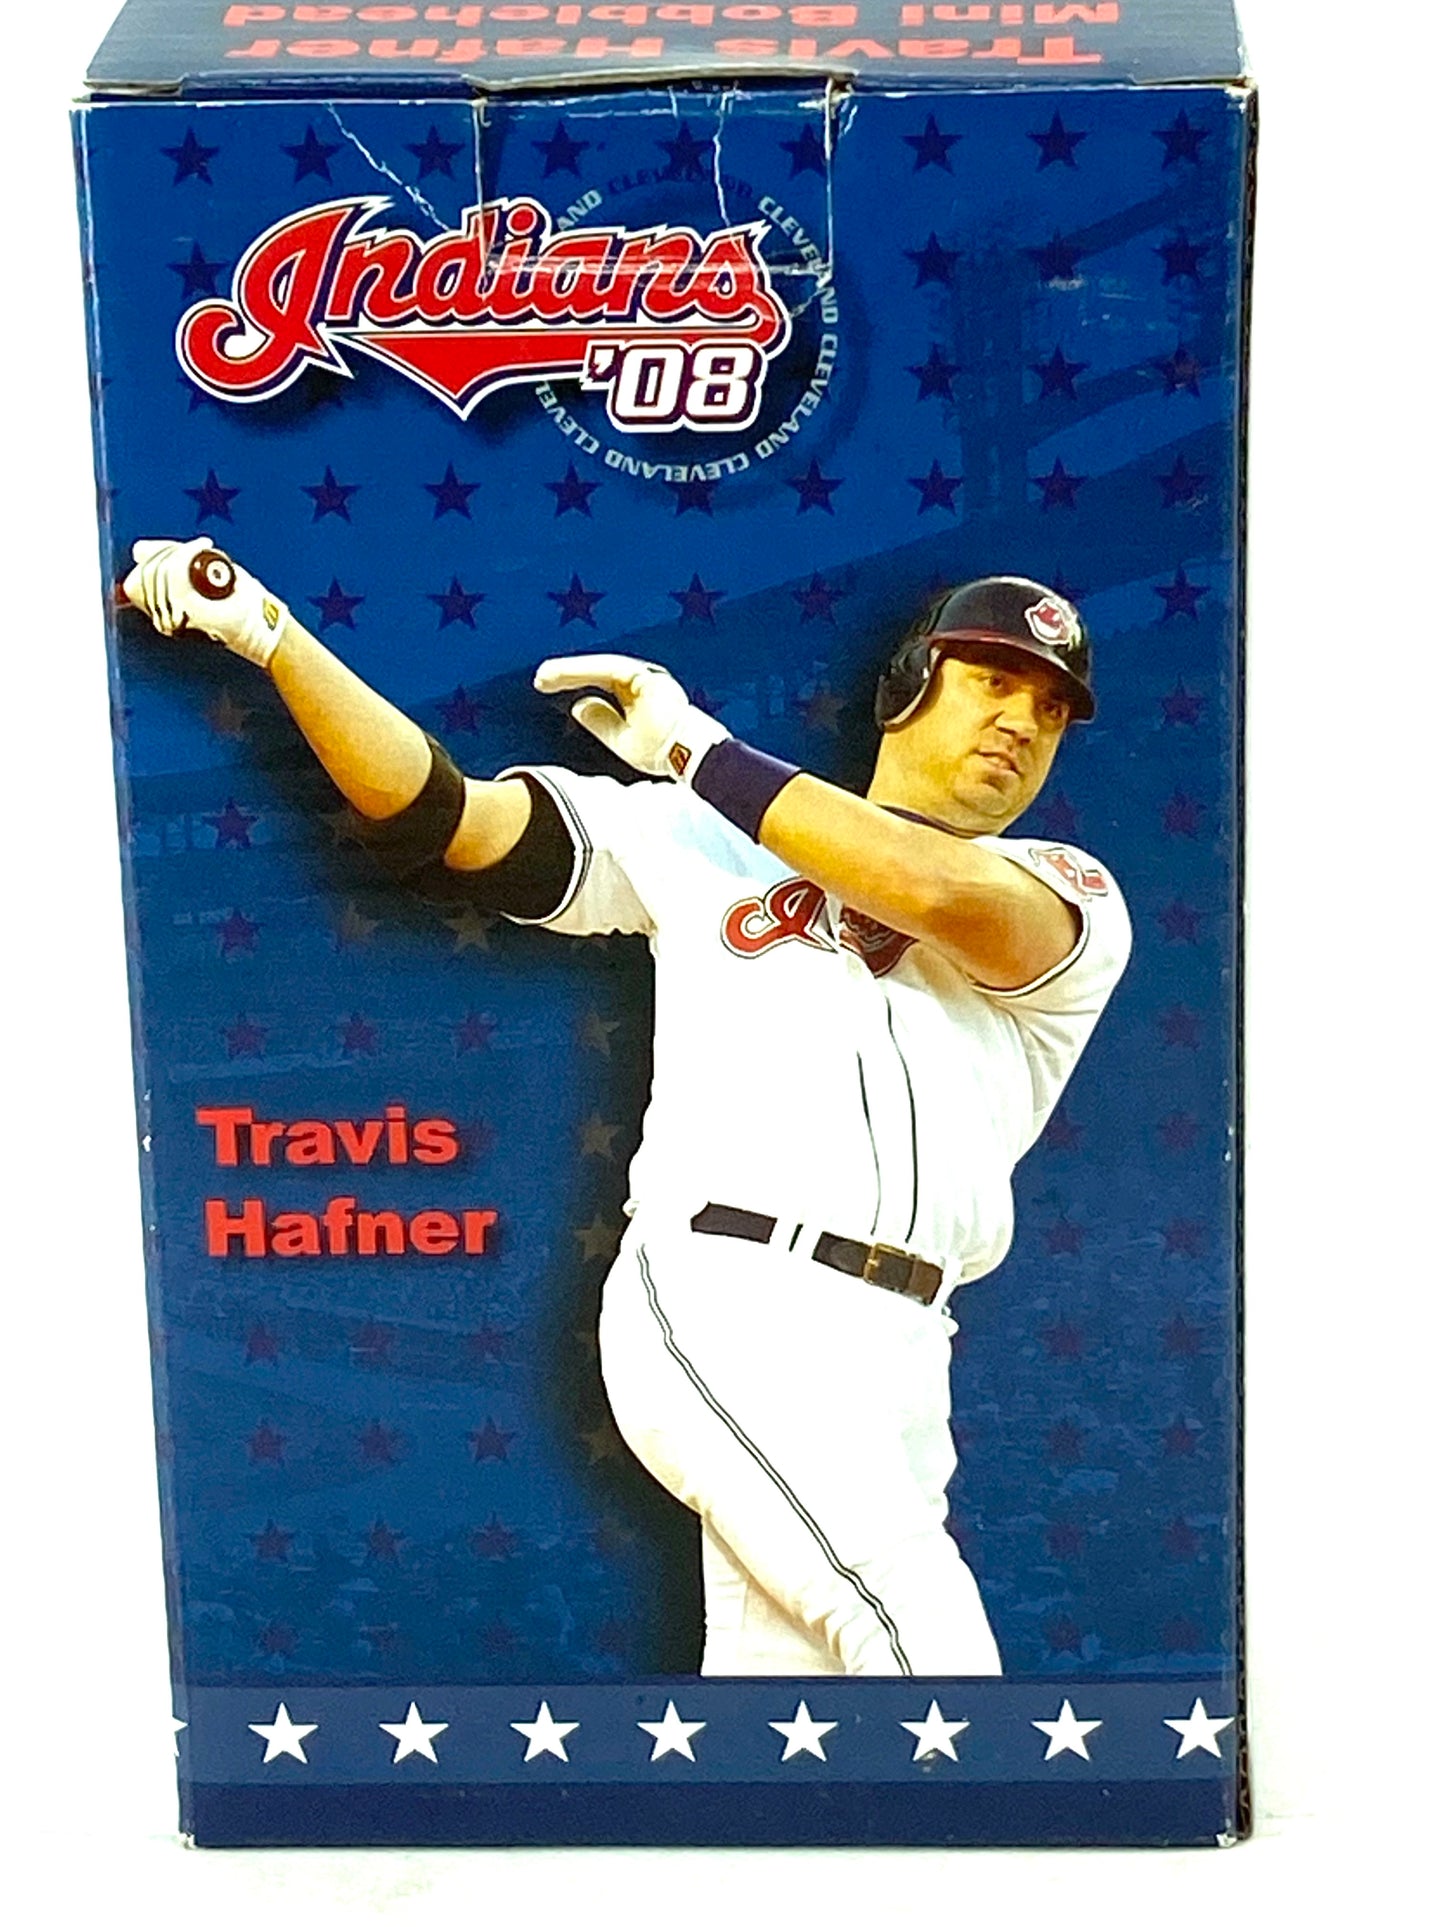 Travis Hafner Cleveland Indians 2008 Mini-Bobblehead Used By BD&A